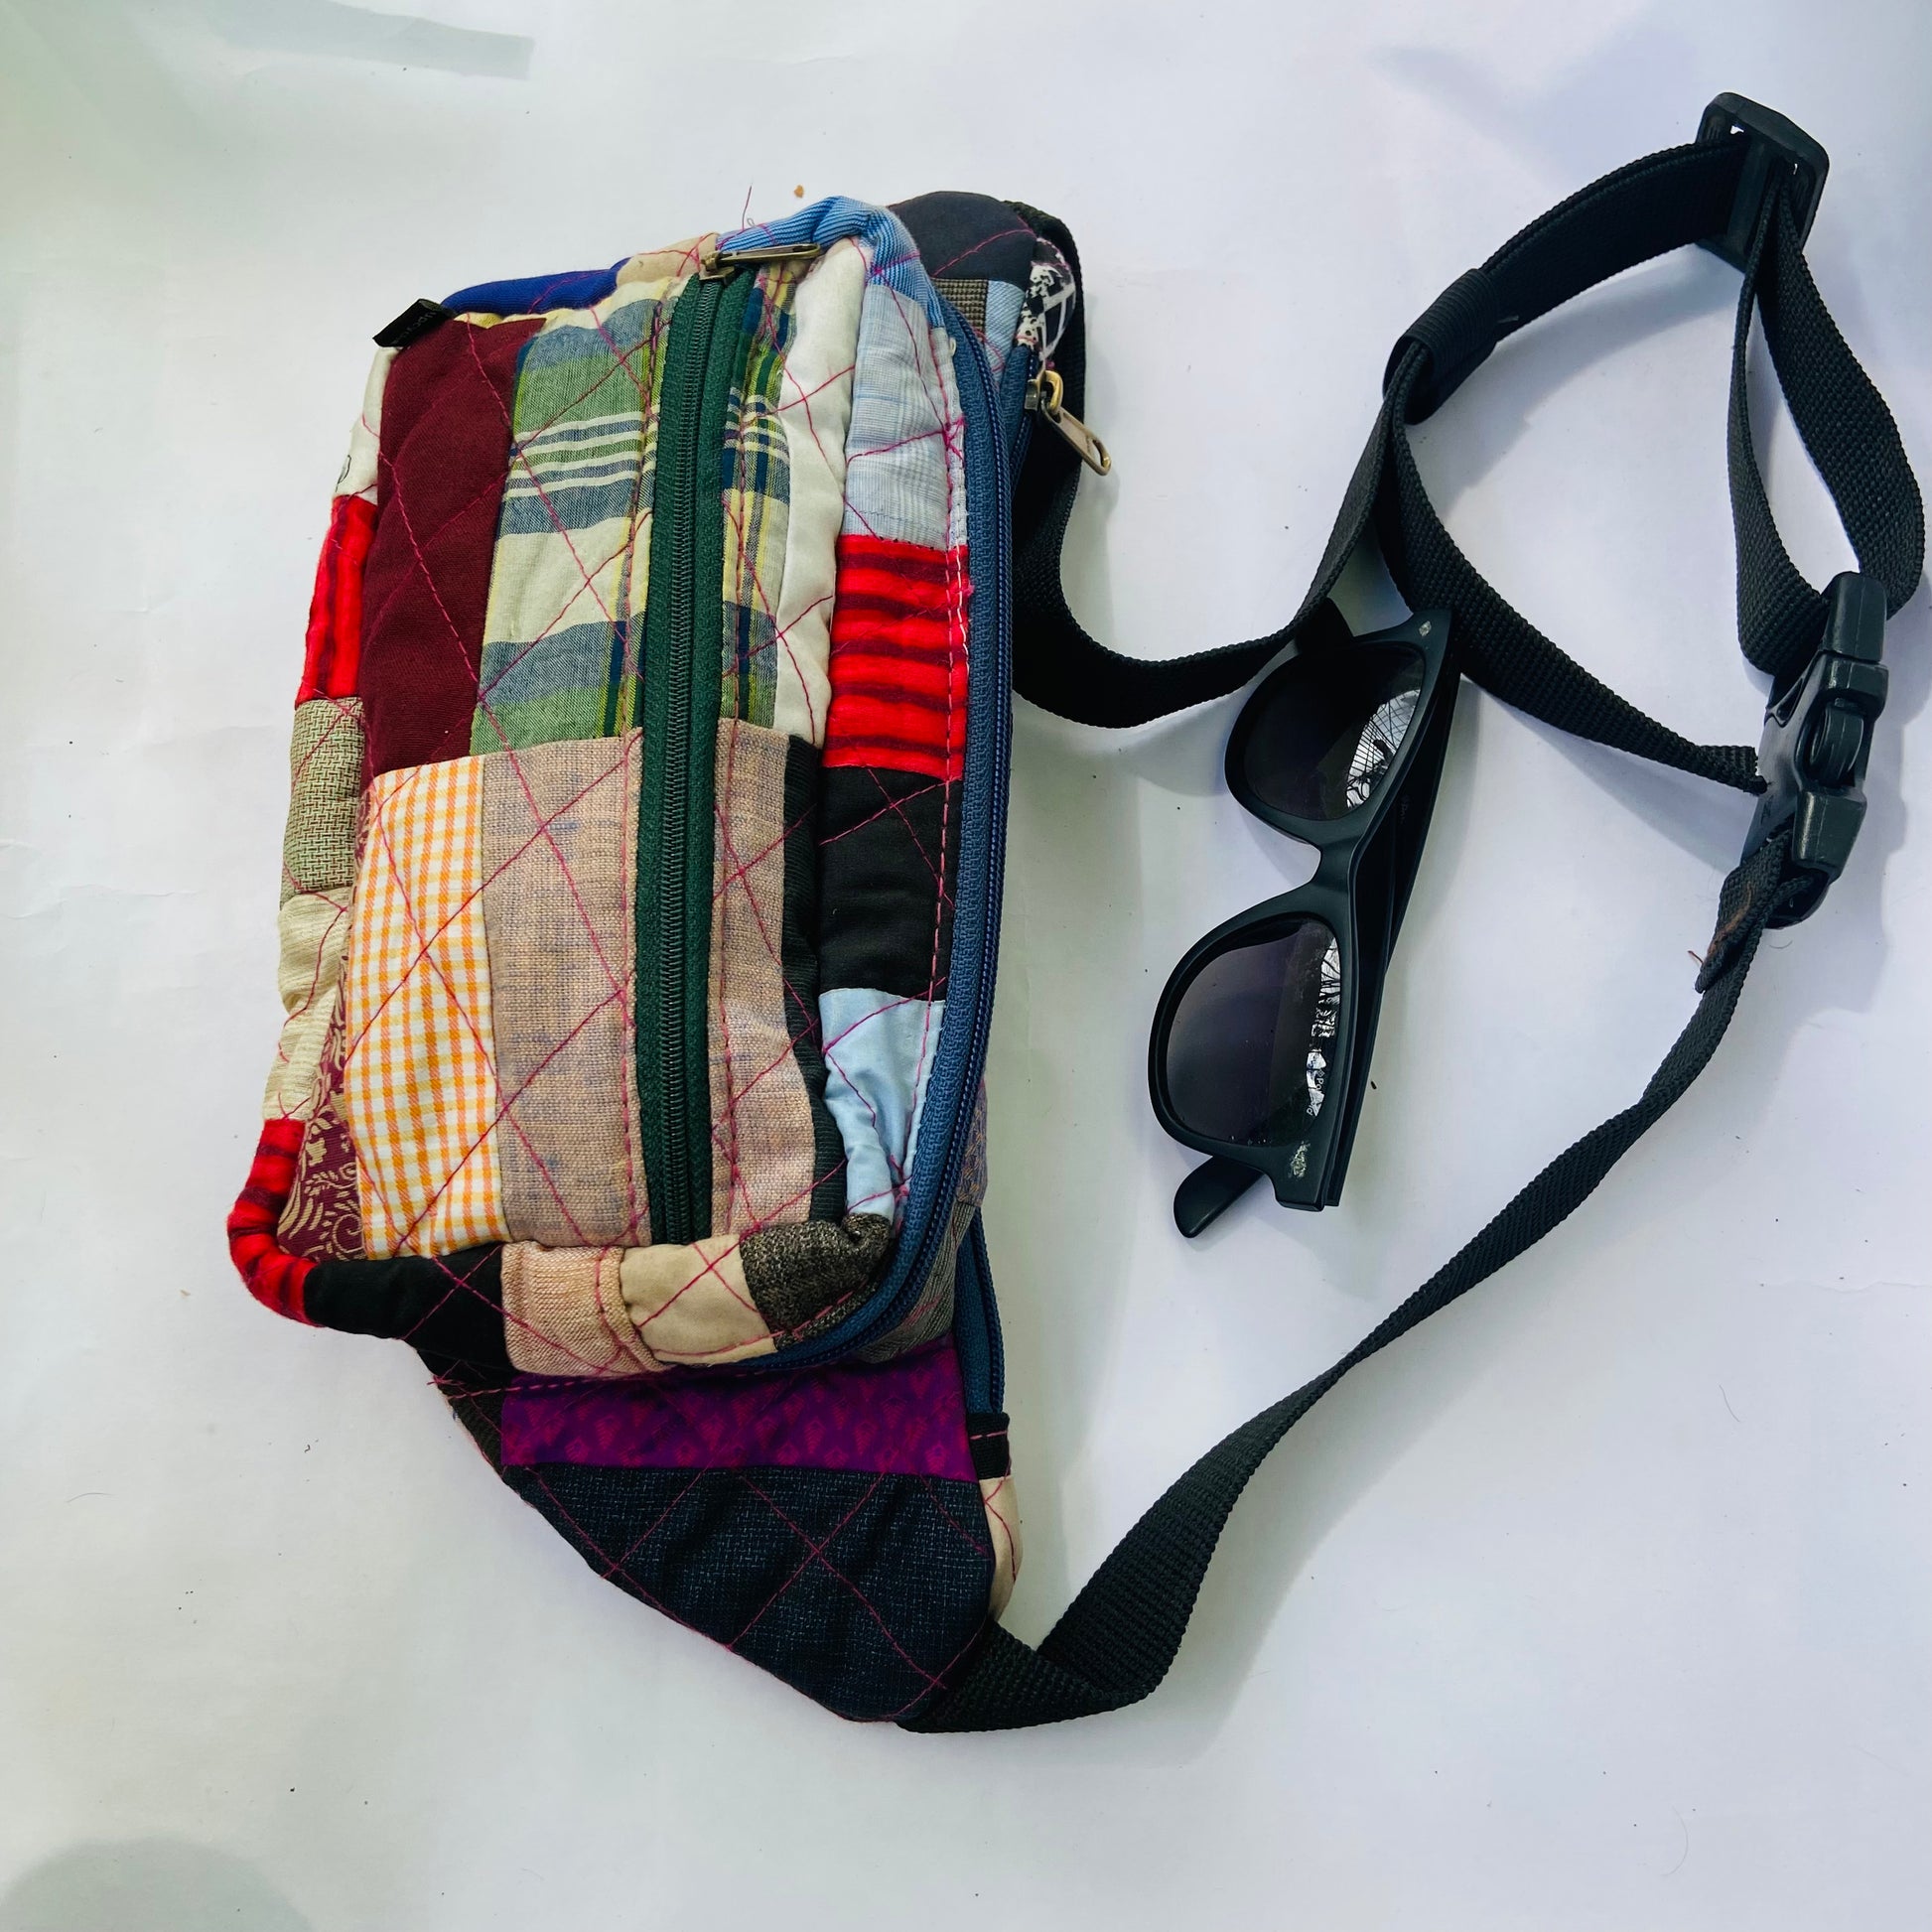 Shop Handmade Fanny Packs Online At Best Prices - Upcyclie